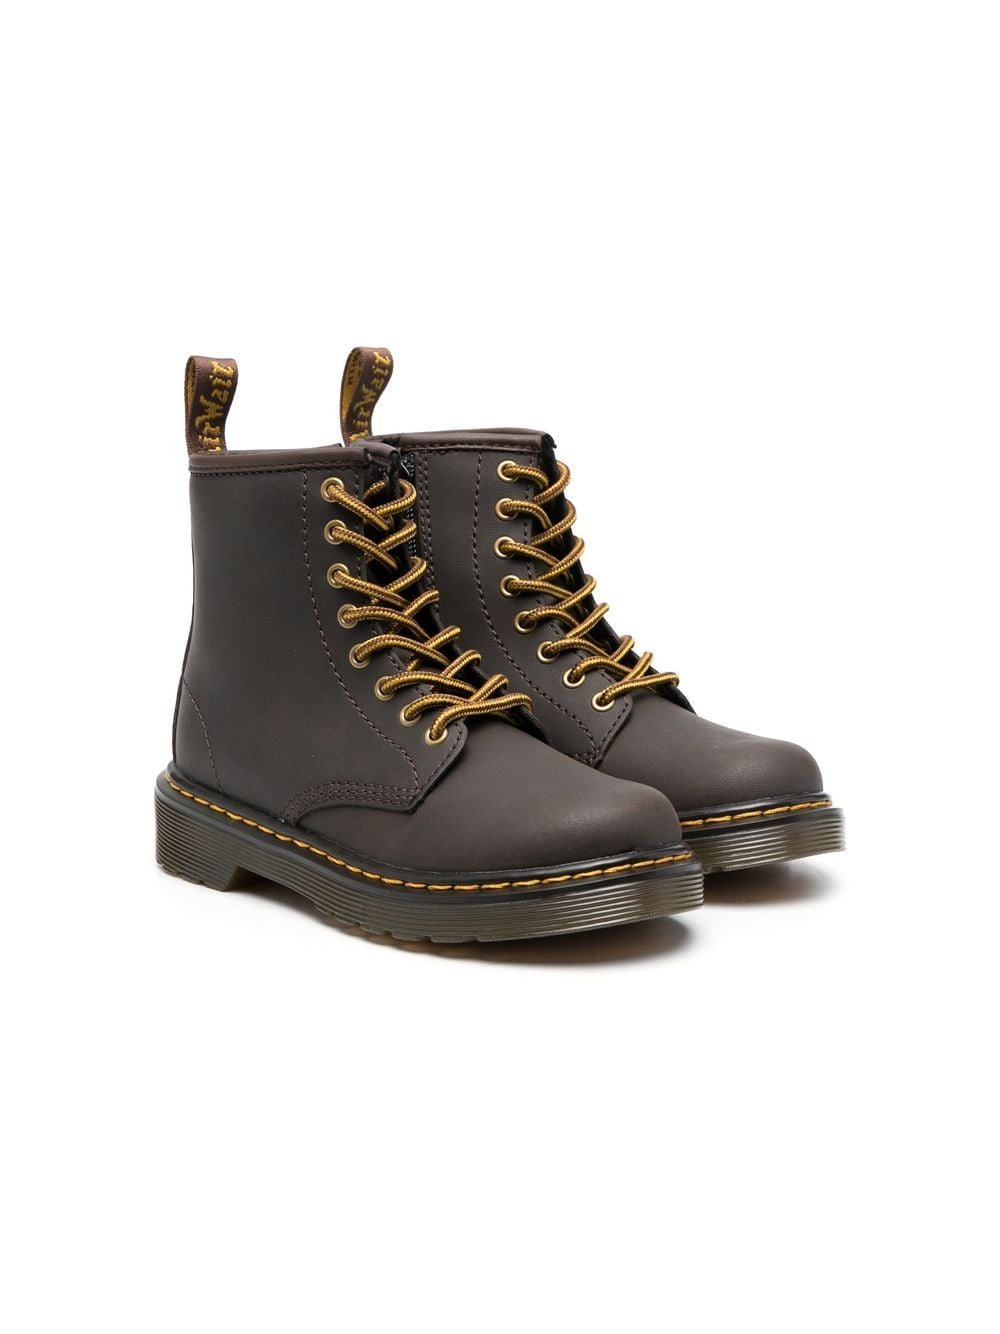 Dr. Martens Kids 1460 leather lace-up boots - Braun